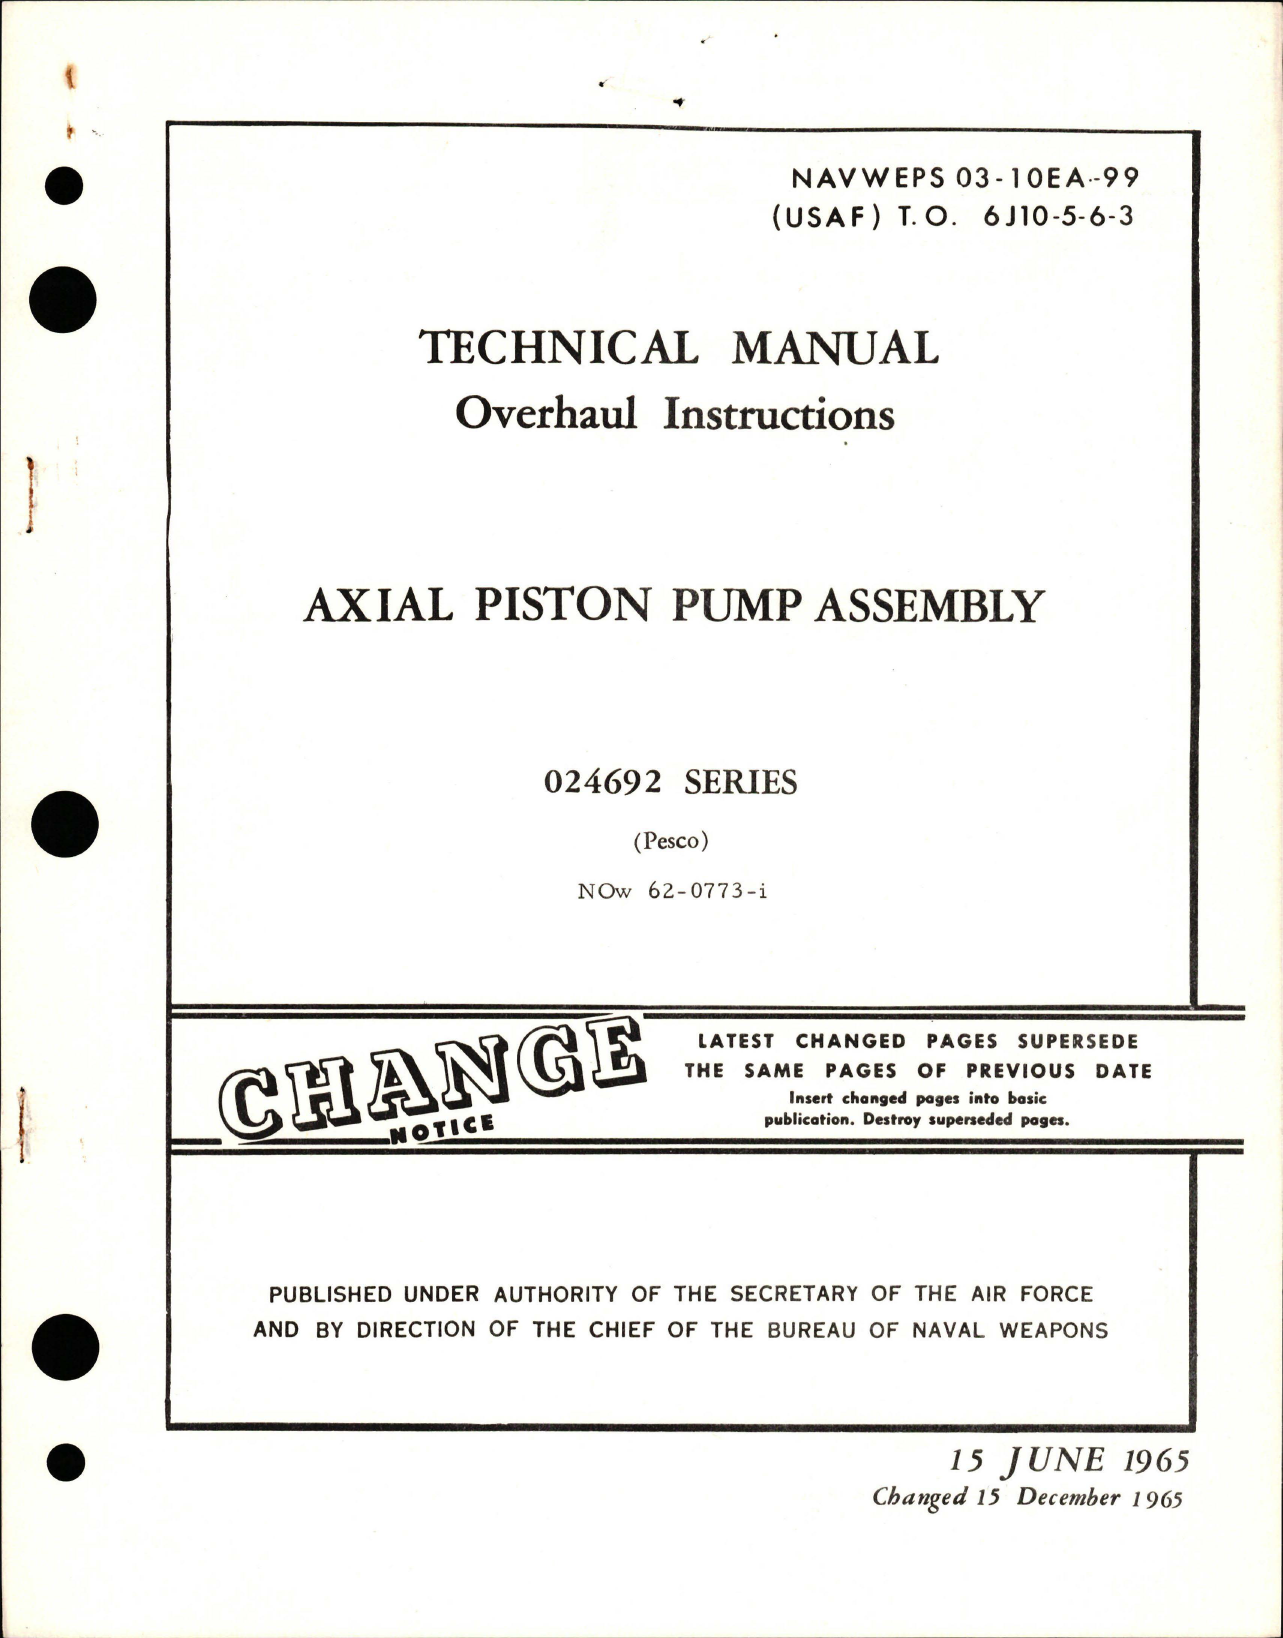 Sample page 1 from AirCorps Library document: Overhaul Instructions for Axial Piston Pump Assembly - 024693 Series